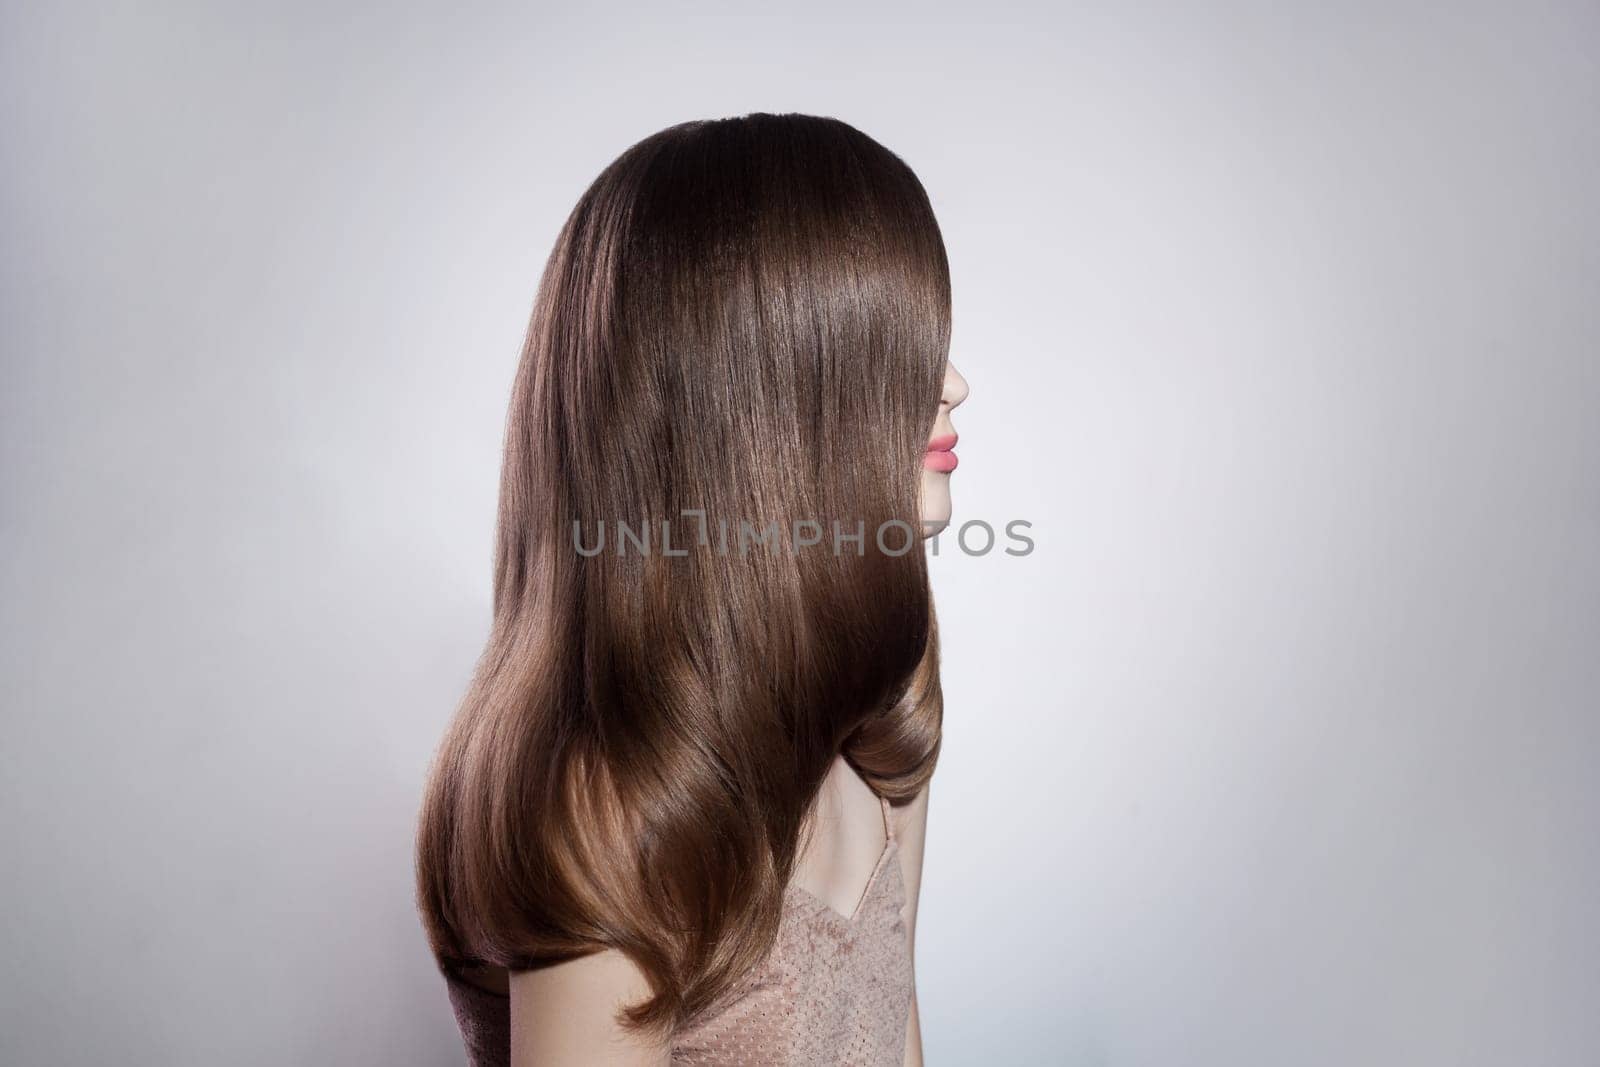 Brunette woman shiny hair and makeup, showing her hair after keratin and using new shampoo. by Khosro1